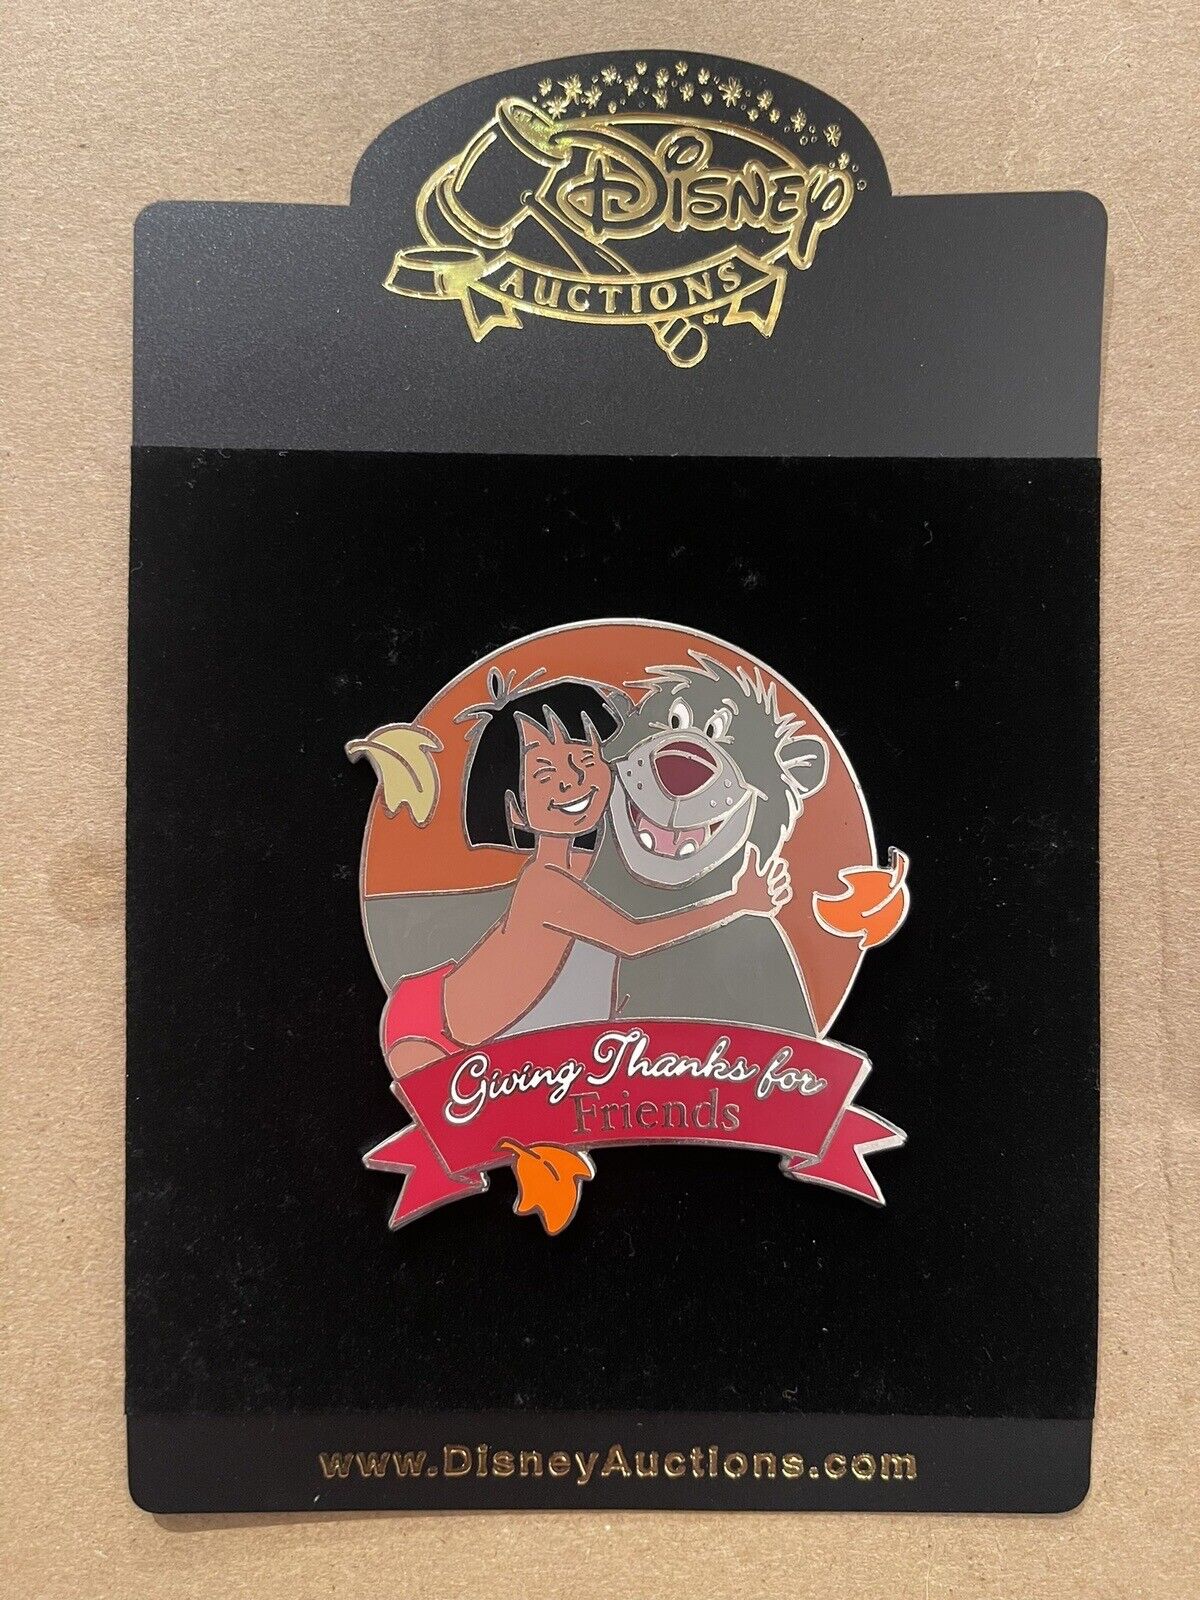 Disney Auctions Jungle Book Pin Thanksgiving Giving Thanks For Friends LE 100